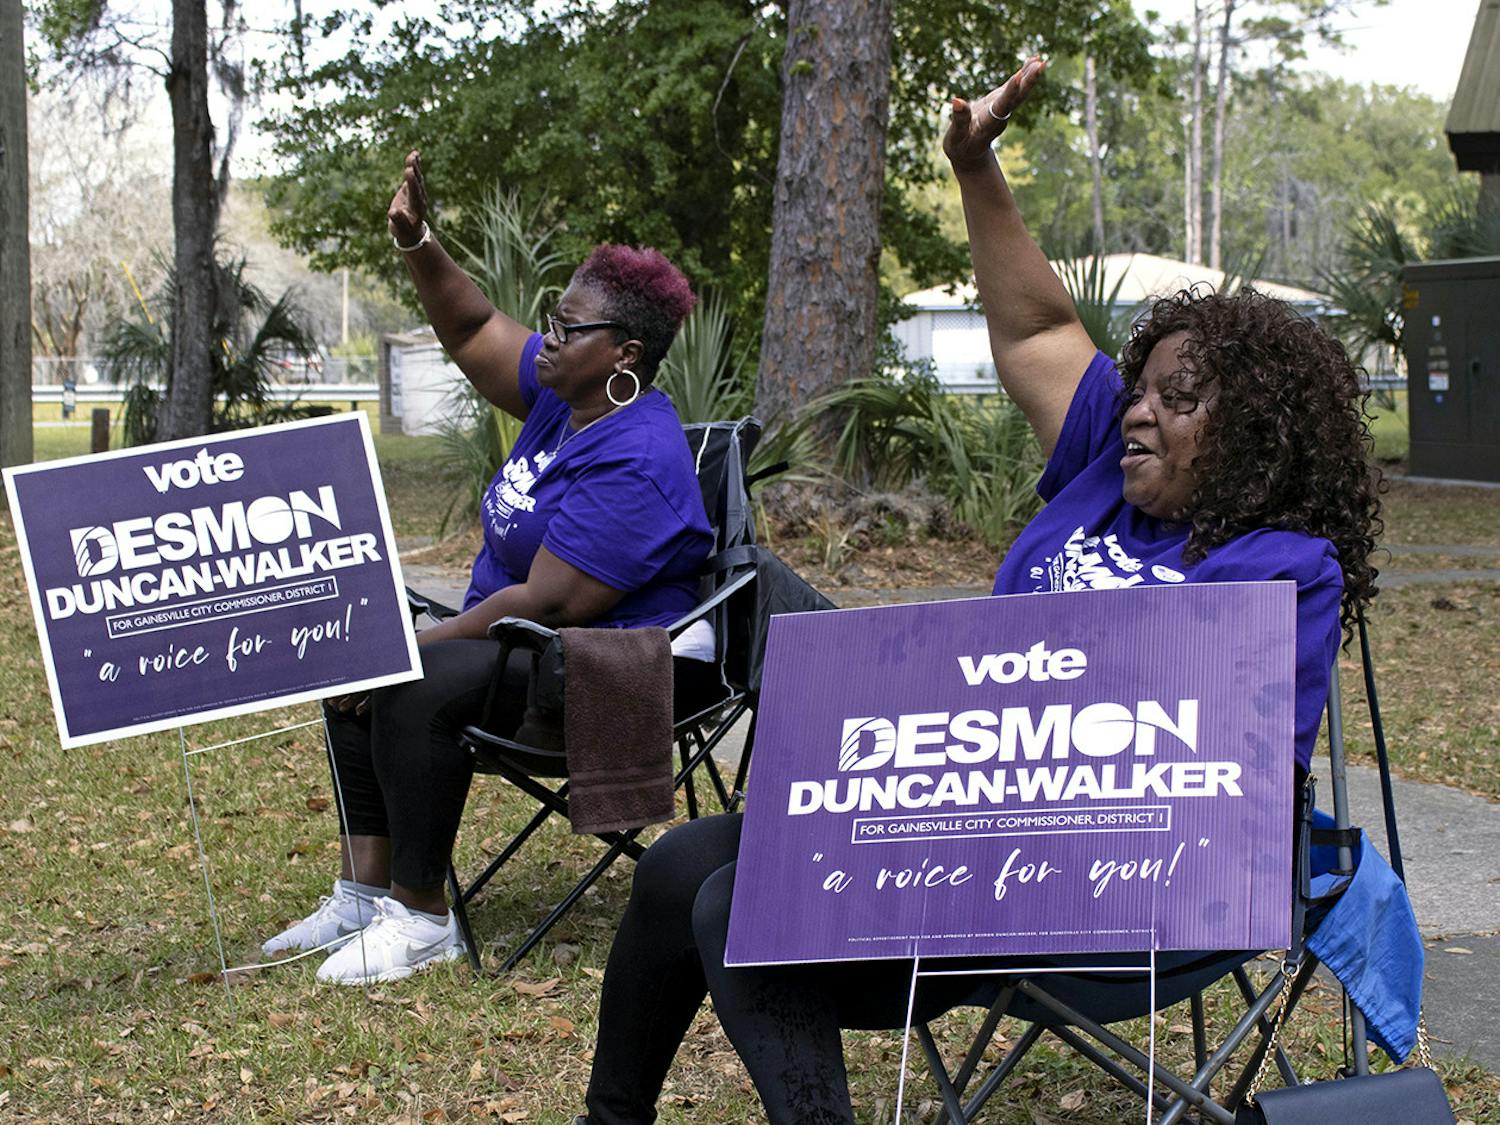 Peggy Golston, 63, (left) and Brendel Lovette, 67, (right) picket at the Mt. Carmel Baptist Church Precinct 30 polling place to show their support for Desmon Duncan-Walker, the District 1 Gainesville City Commissioner-elect, on Tuesday, March 16, 2021.